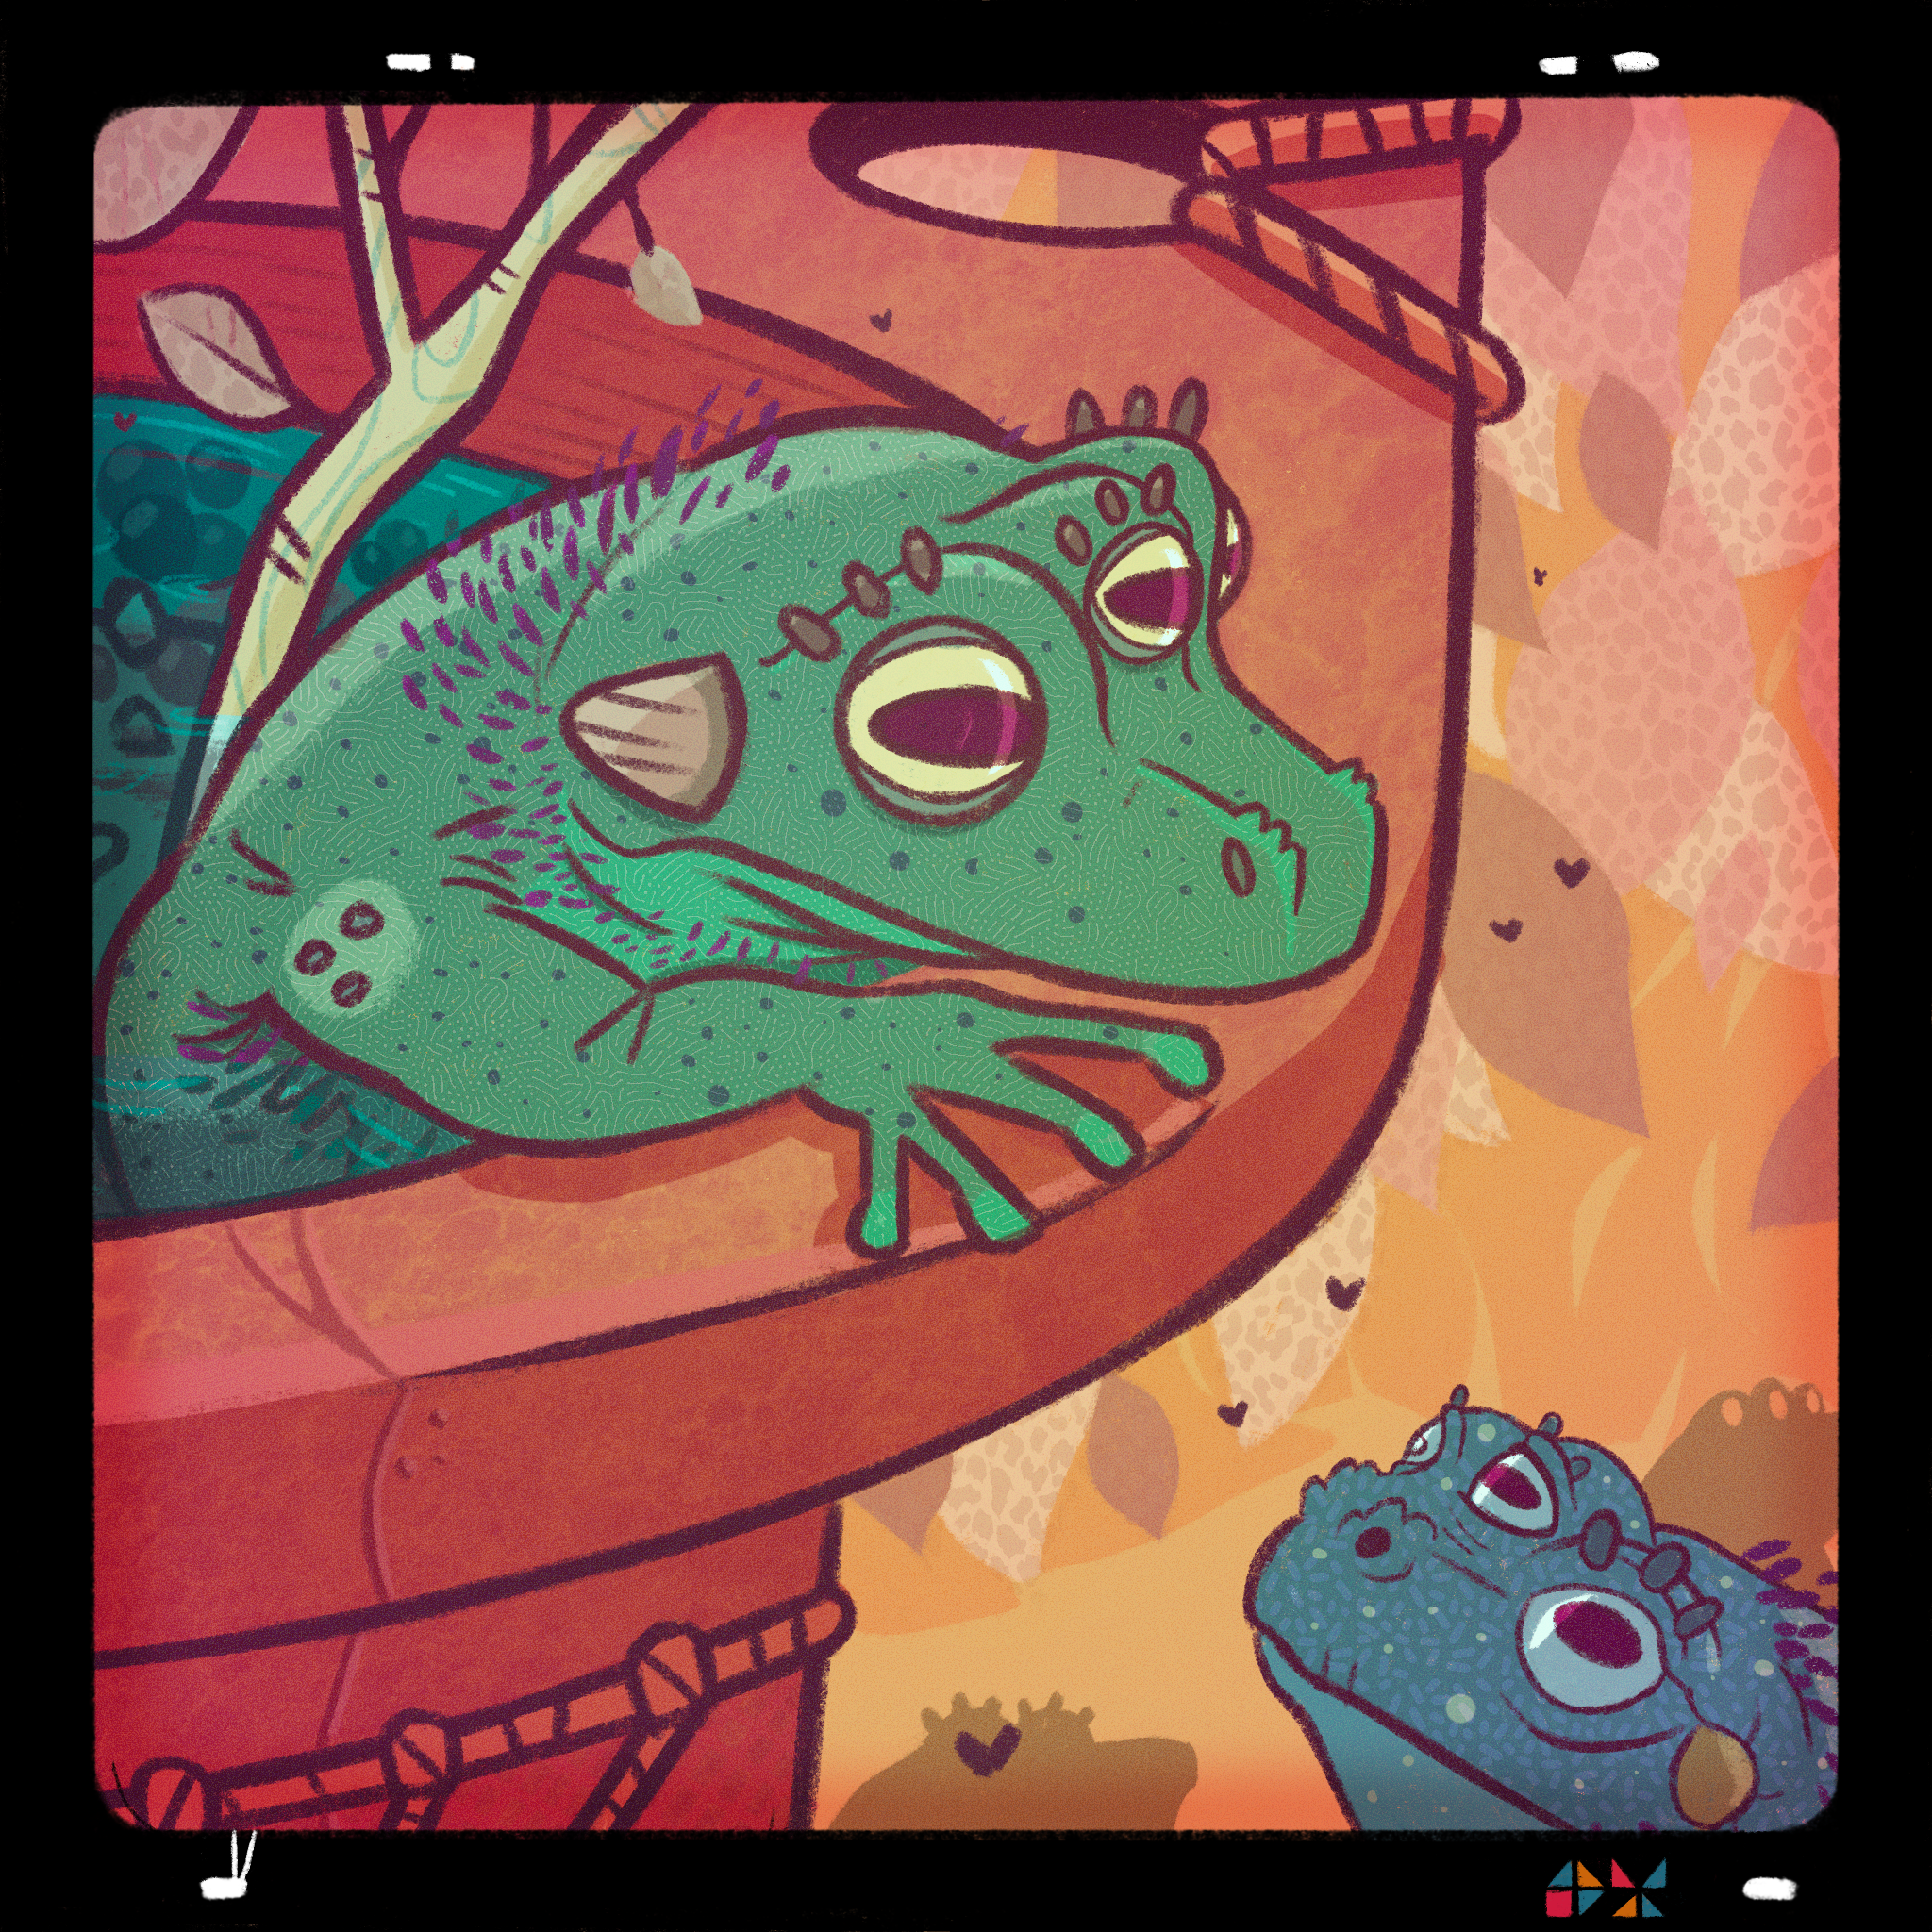 A digital drawing of two frogs, each with three eyes and tiny horns across their foreheads. The green frog sits in a pot, peering over the edge while the blue frog sits below, looking up at the first.